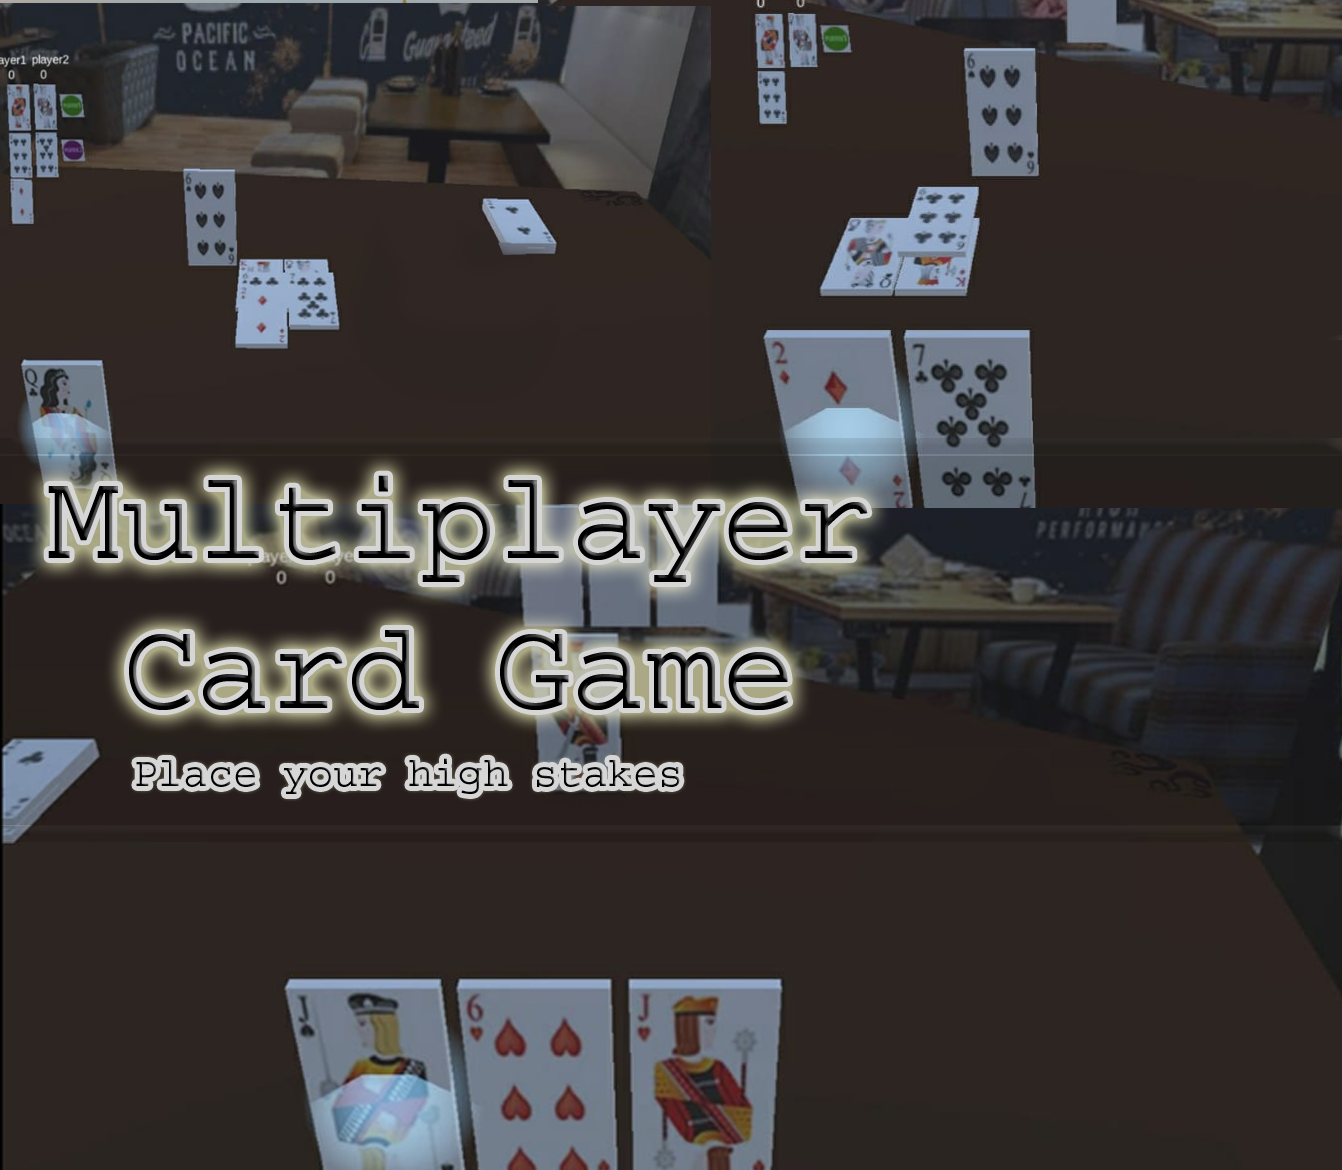 MULTIPLAYER CARD GAME